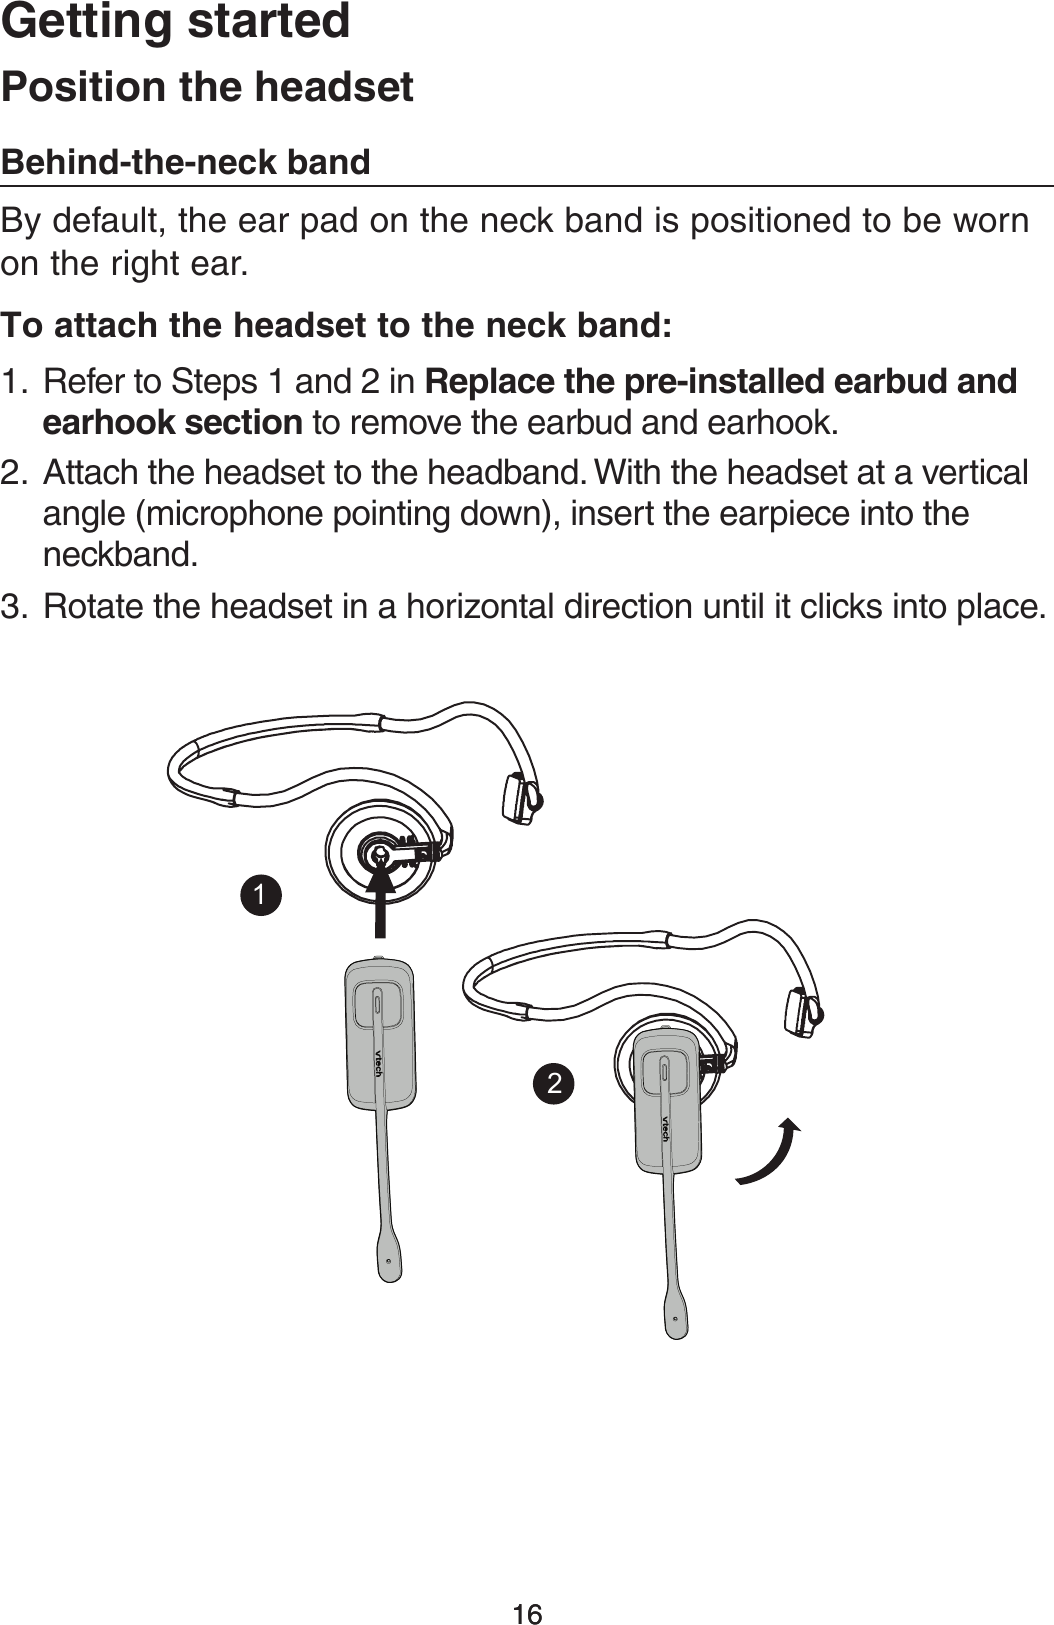 1616(FUUJOHTUBSUFEBy default, the ear pad on the neck band is positioned to be worn on the right ear.5PBUUBDIUIFIFBETFUUPUIFOFDLCBOERefer to Steps 1 and 2 in 3FQMBDFUIFQSFJOTUBMMFEFBSCVEBOEFBSIPPLTFDUJPOto remove the earbud and earhook.Attach the headset to the headband. With the headset at a vertical angle (microphone pointing down), insert the earpiece into the neckband.Rotate the headset in a horizontal direction until it clicks into place.1.2.3.1PTJUJPOUIFIFBETFU#FIJOEUIFOFDLCBOE12